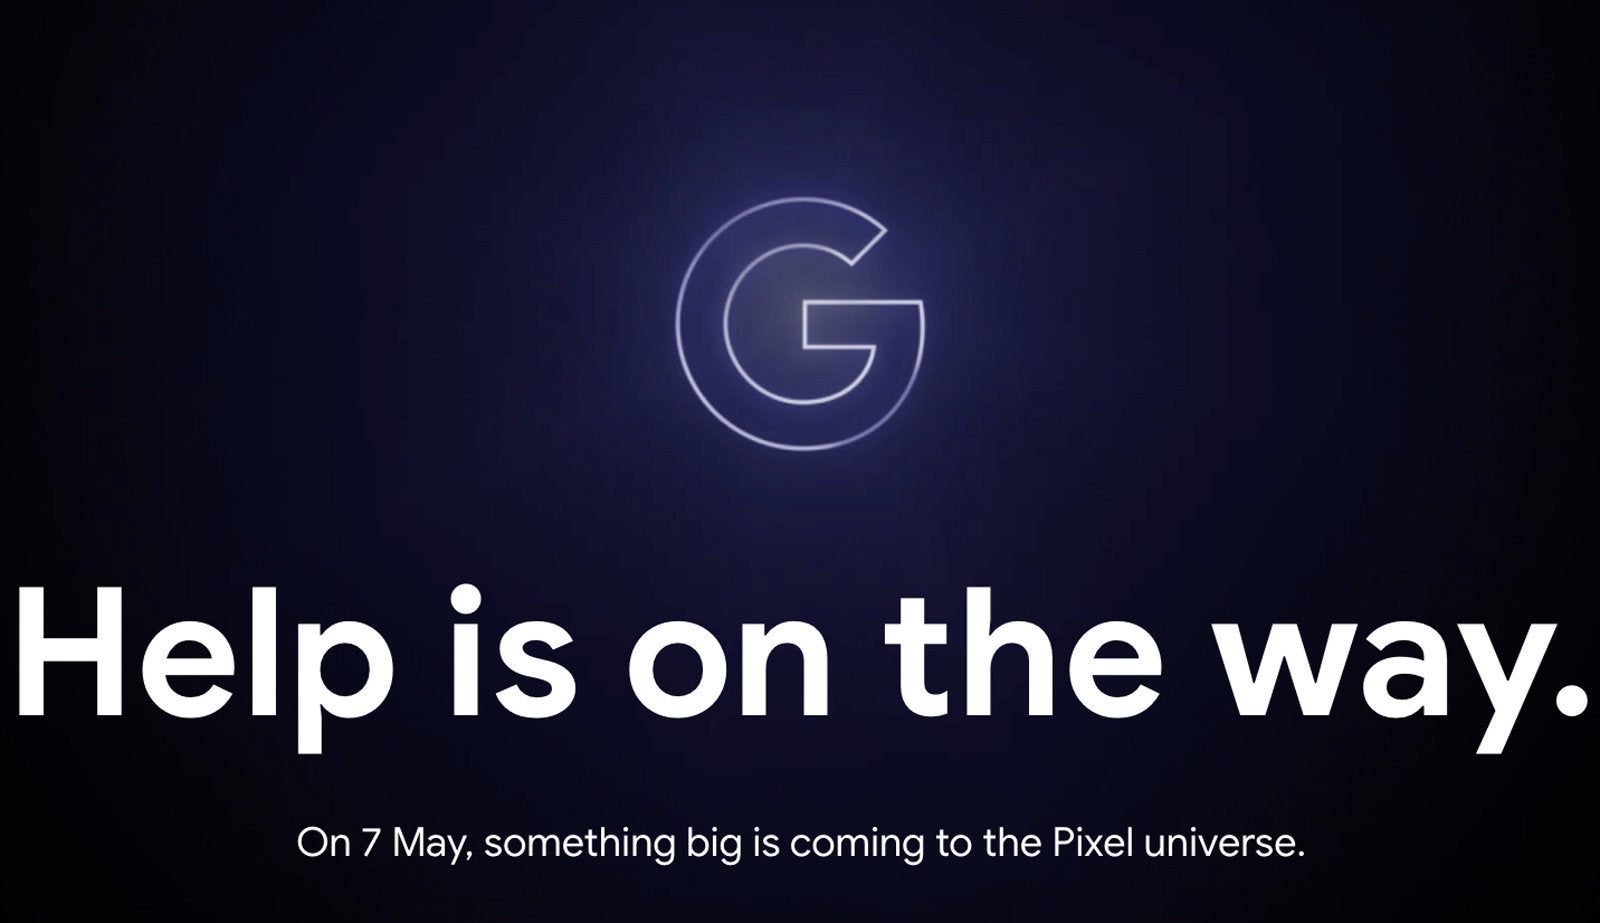 Google Pixel 3a teaser - Official Google Pixel 3a &amp; 3a XL renders show up ahead of May 7th unveiling